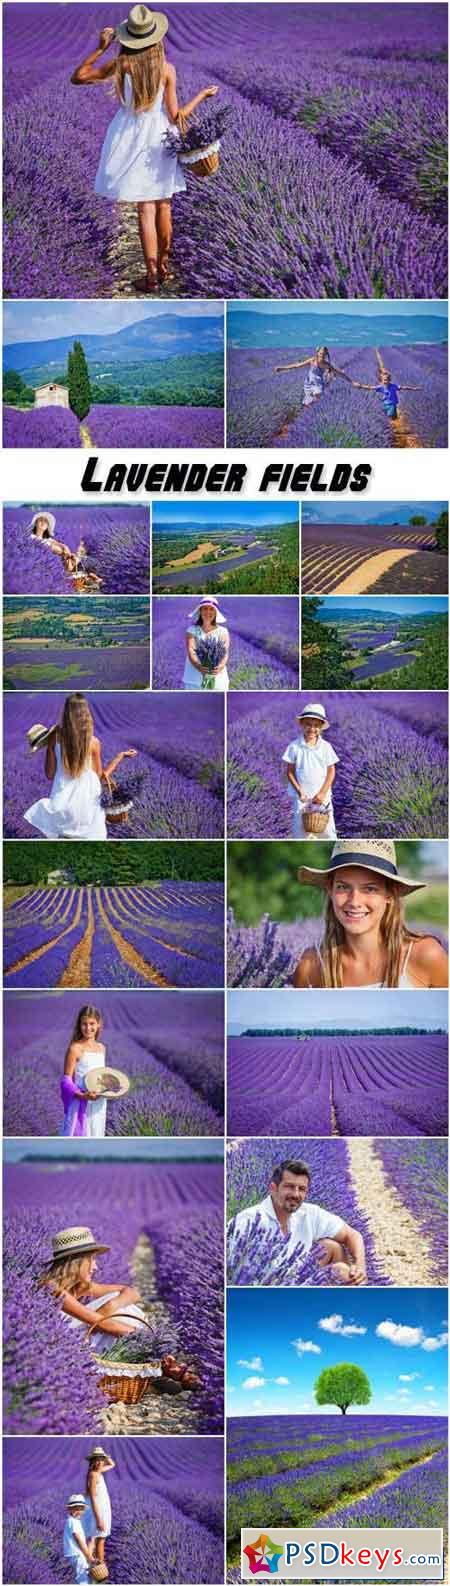 Lavender fields, people and nature